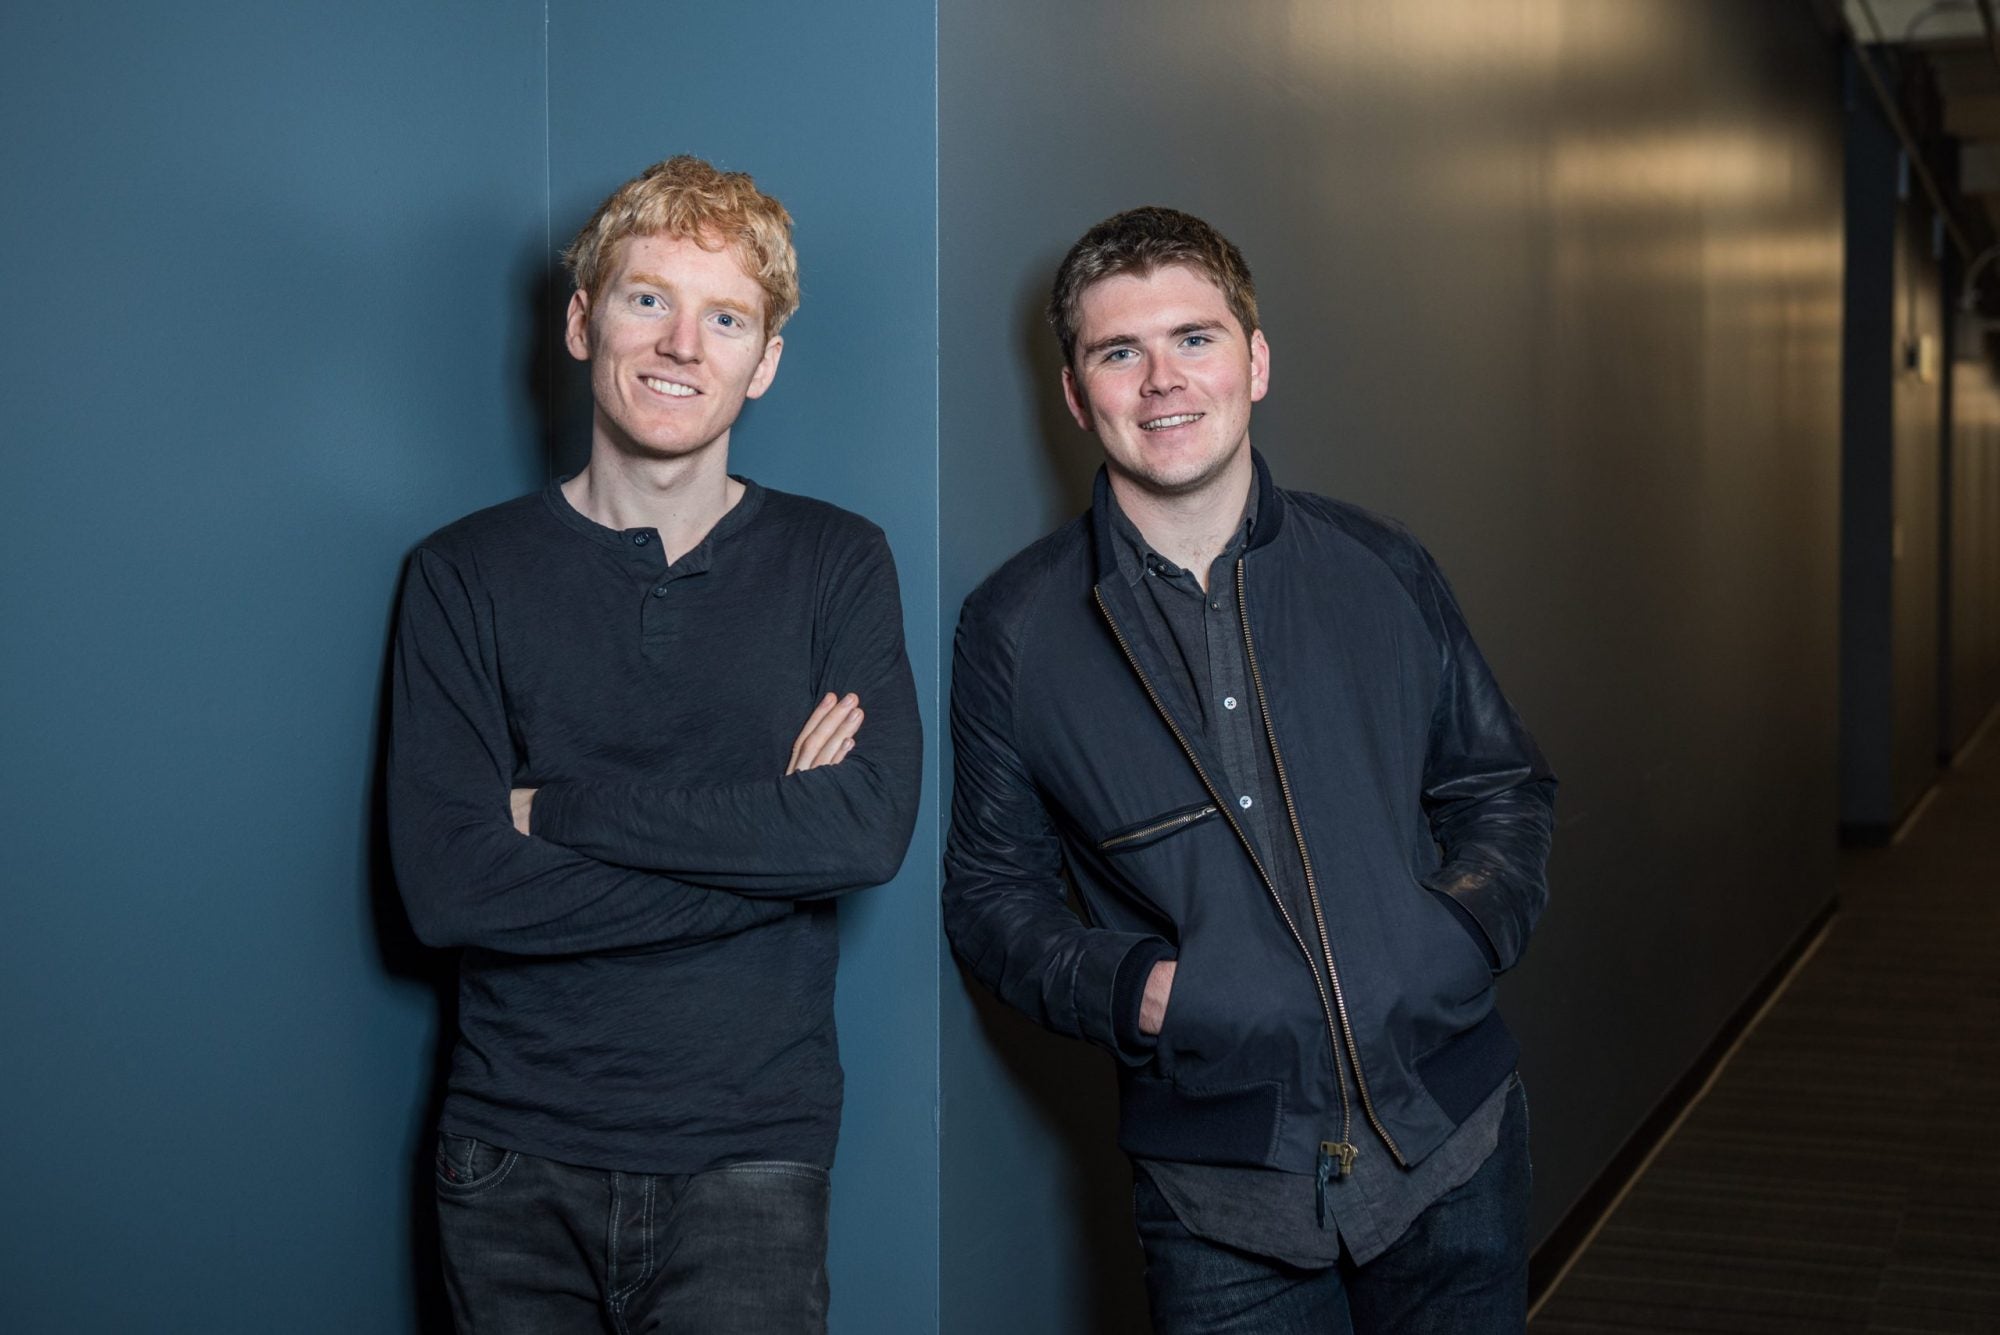 Payments giant Stripe to offer ID verification service